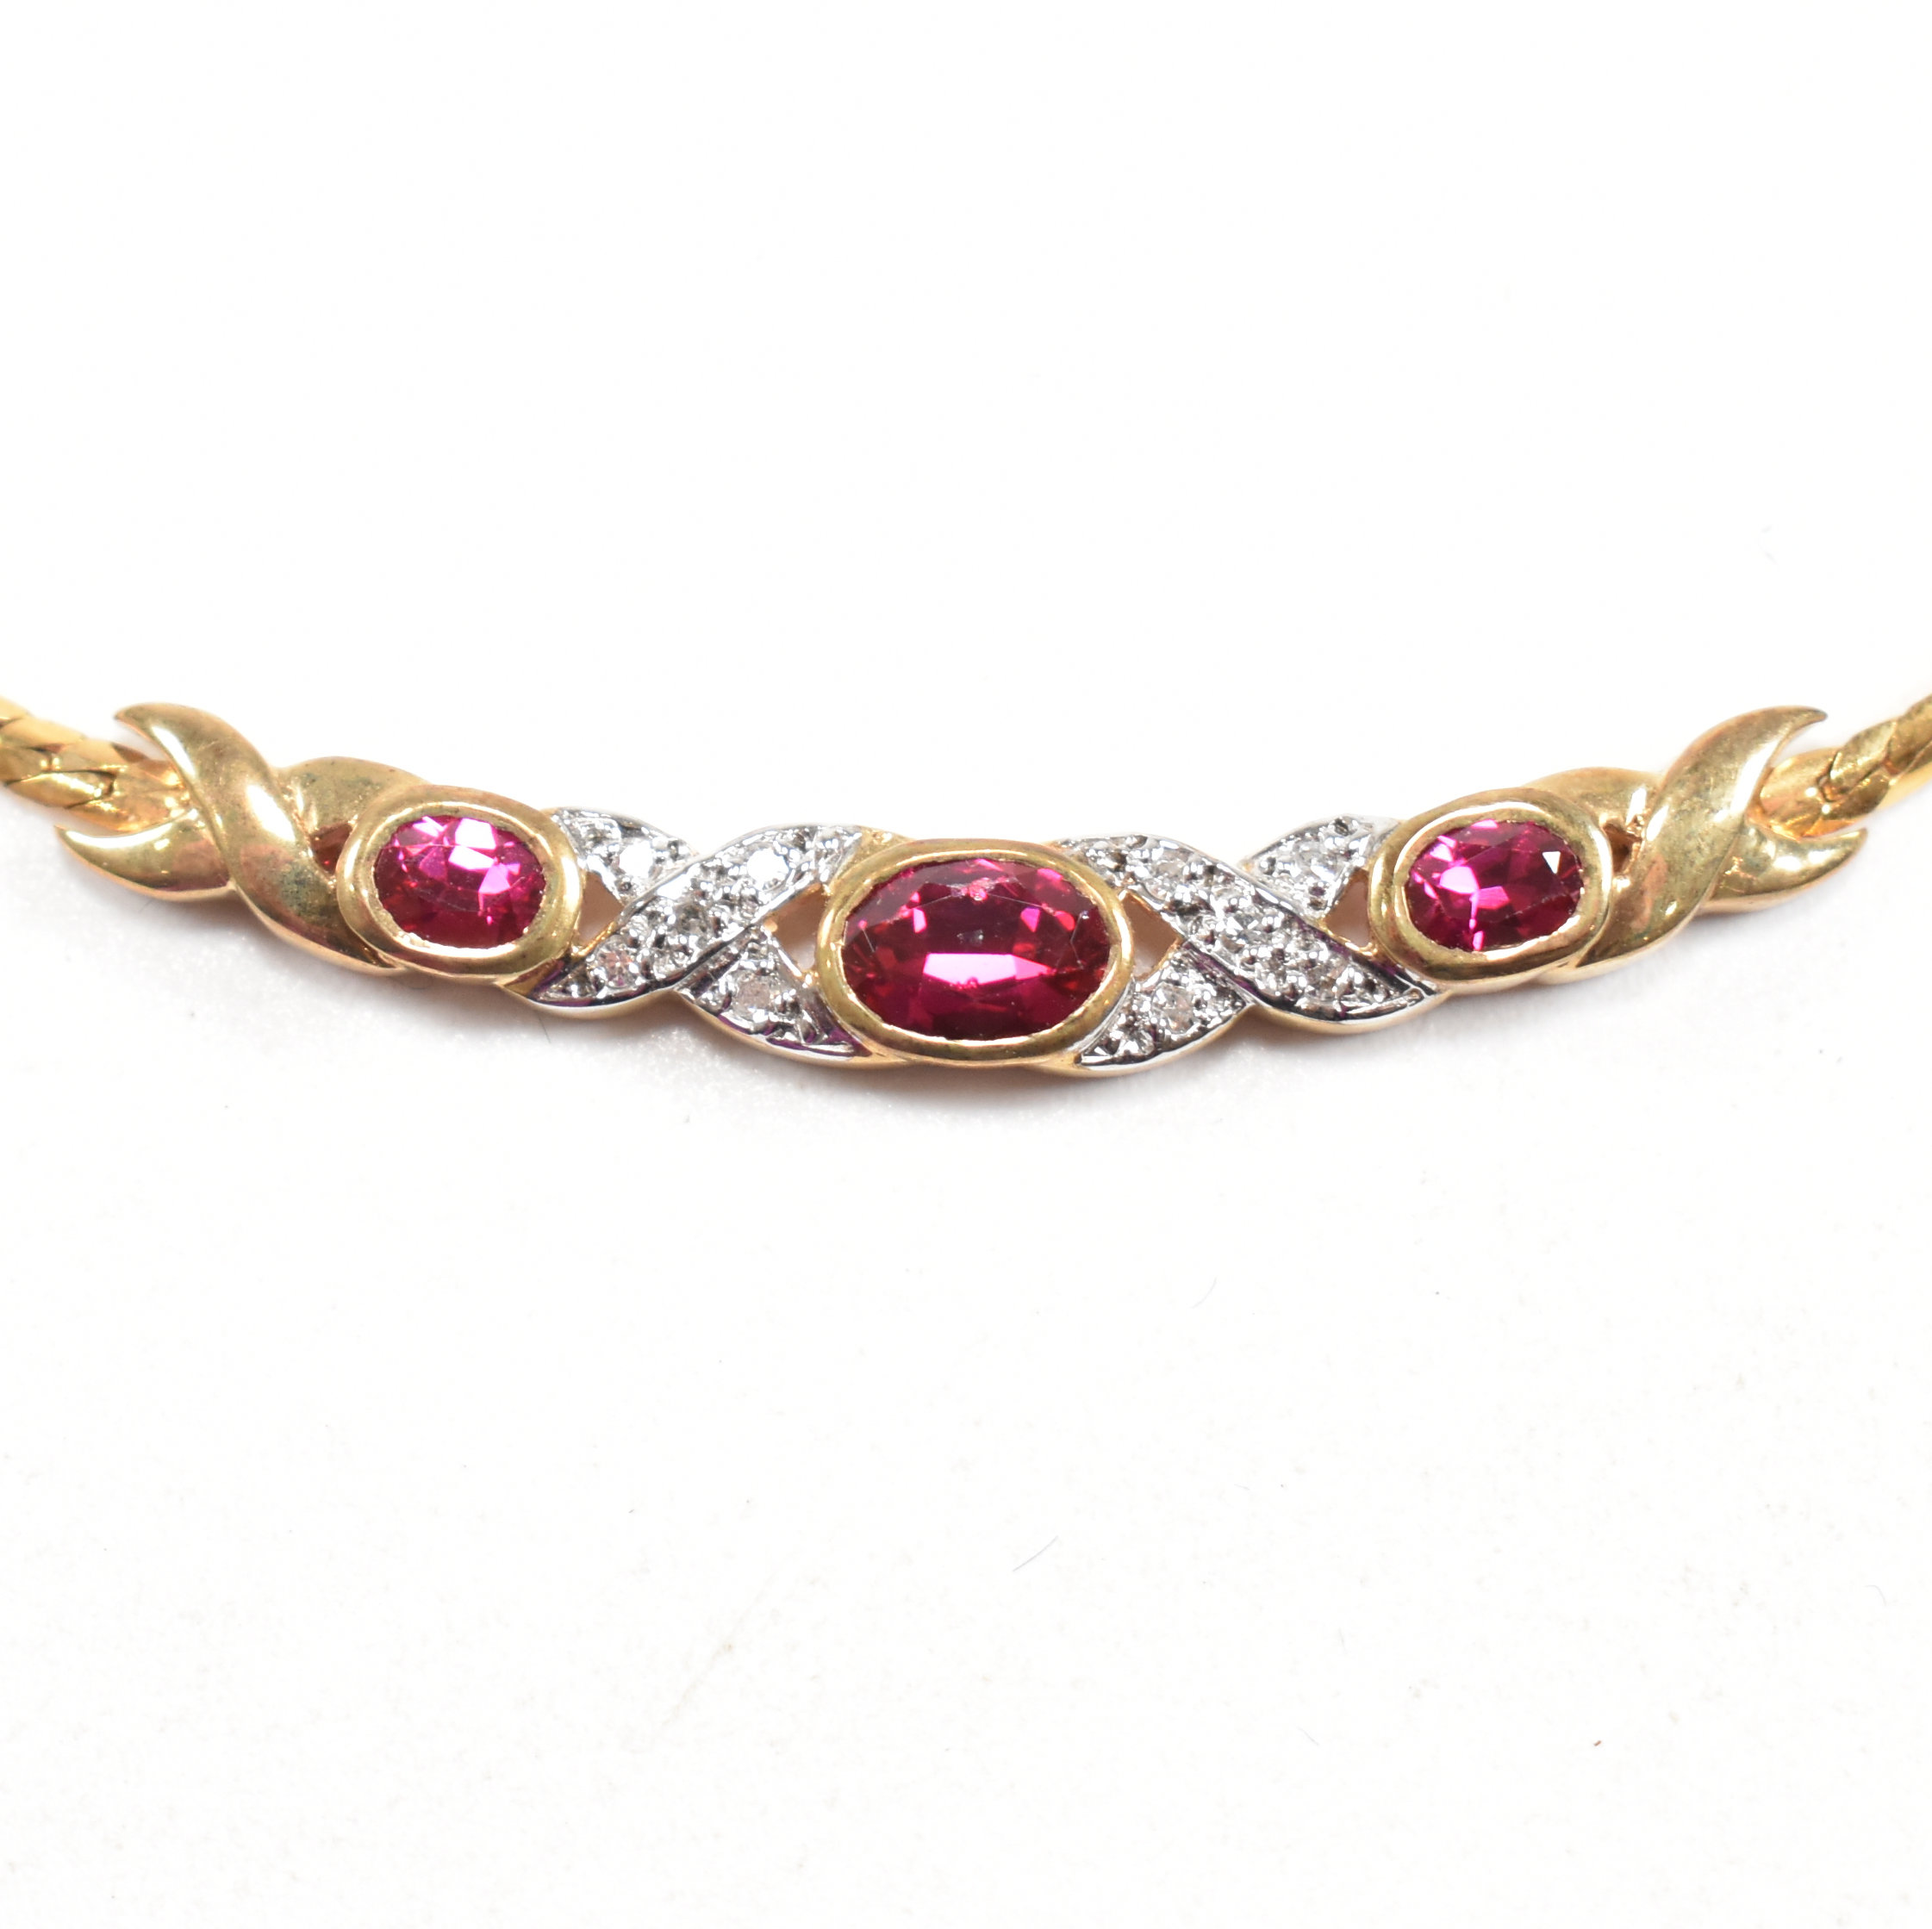 HALLMARKED 9CT GOLD SYNTHETIC RUBY & DIAMOND PENDANT NECKLACE - Image 3 of 5